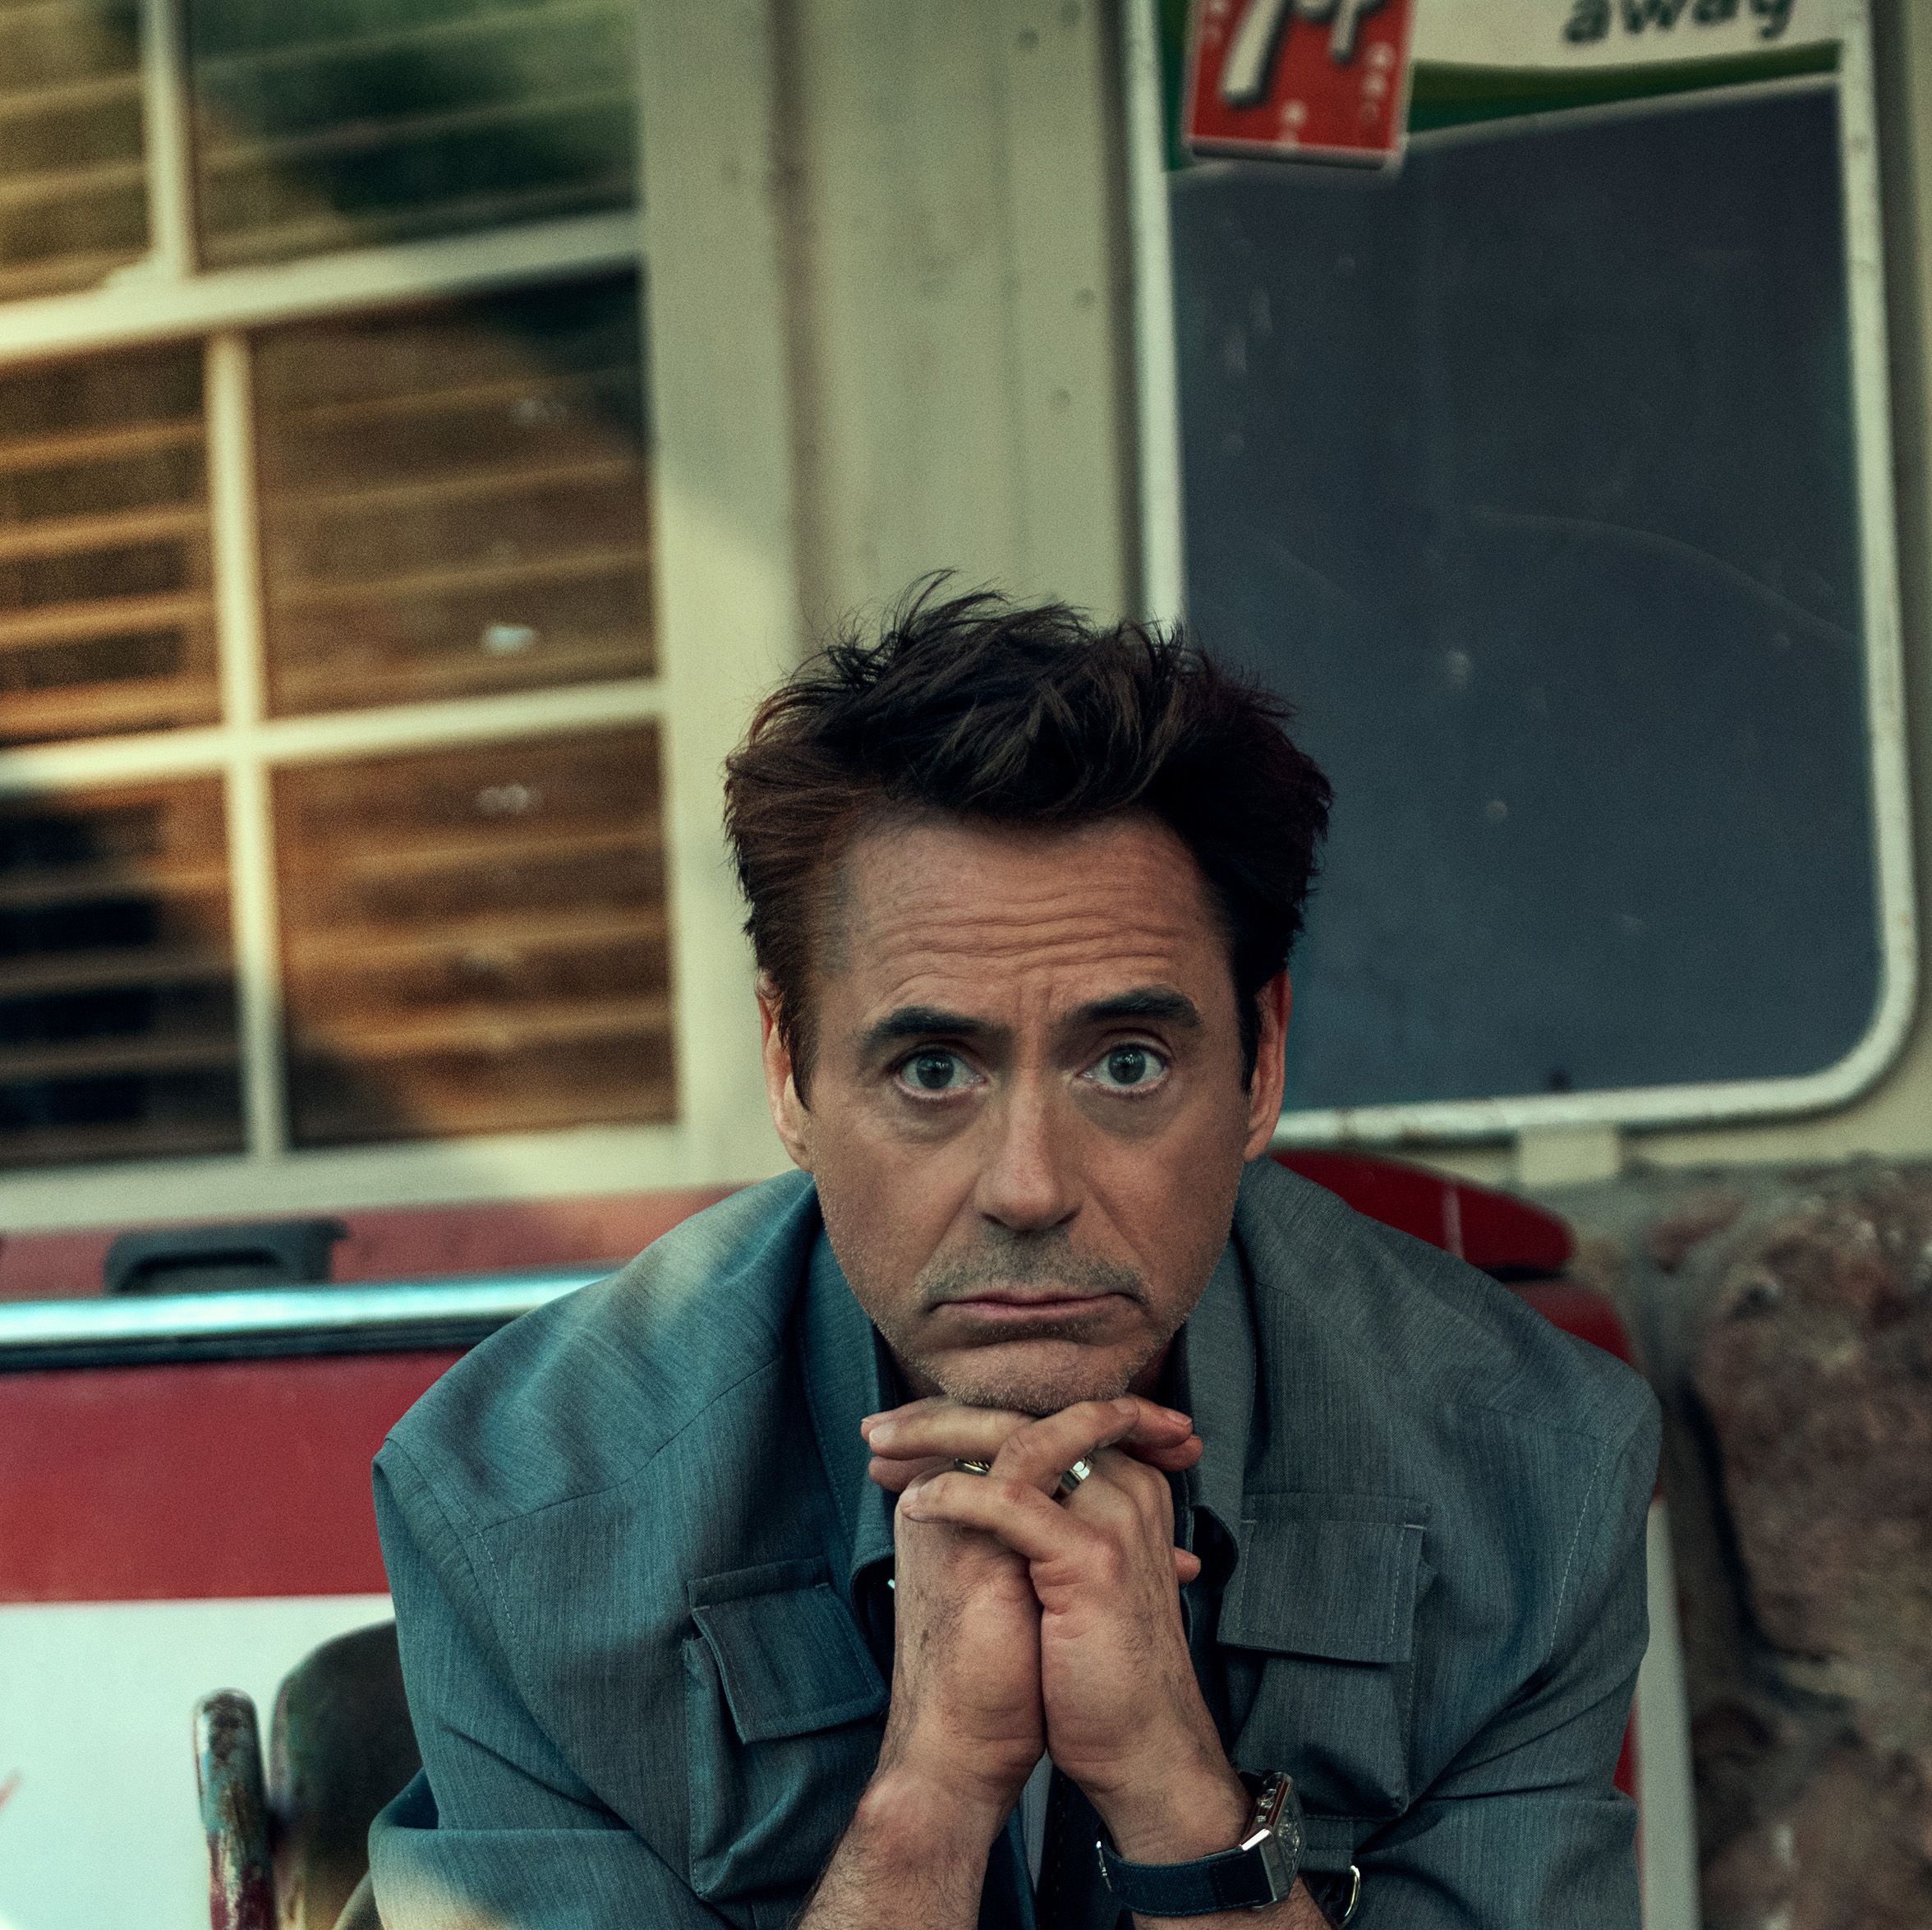 Robert Downey Jr. Doesn't See Things the Way You Do